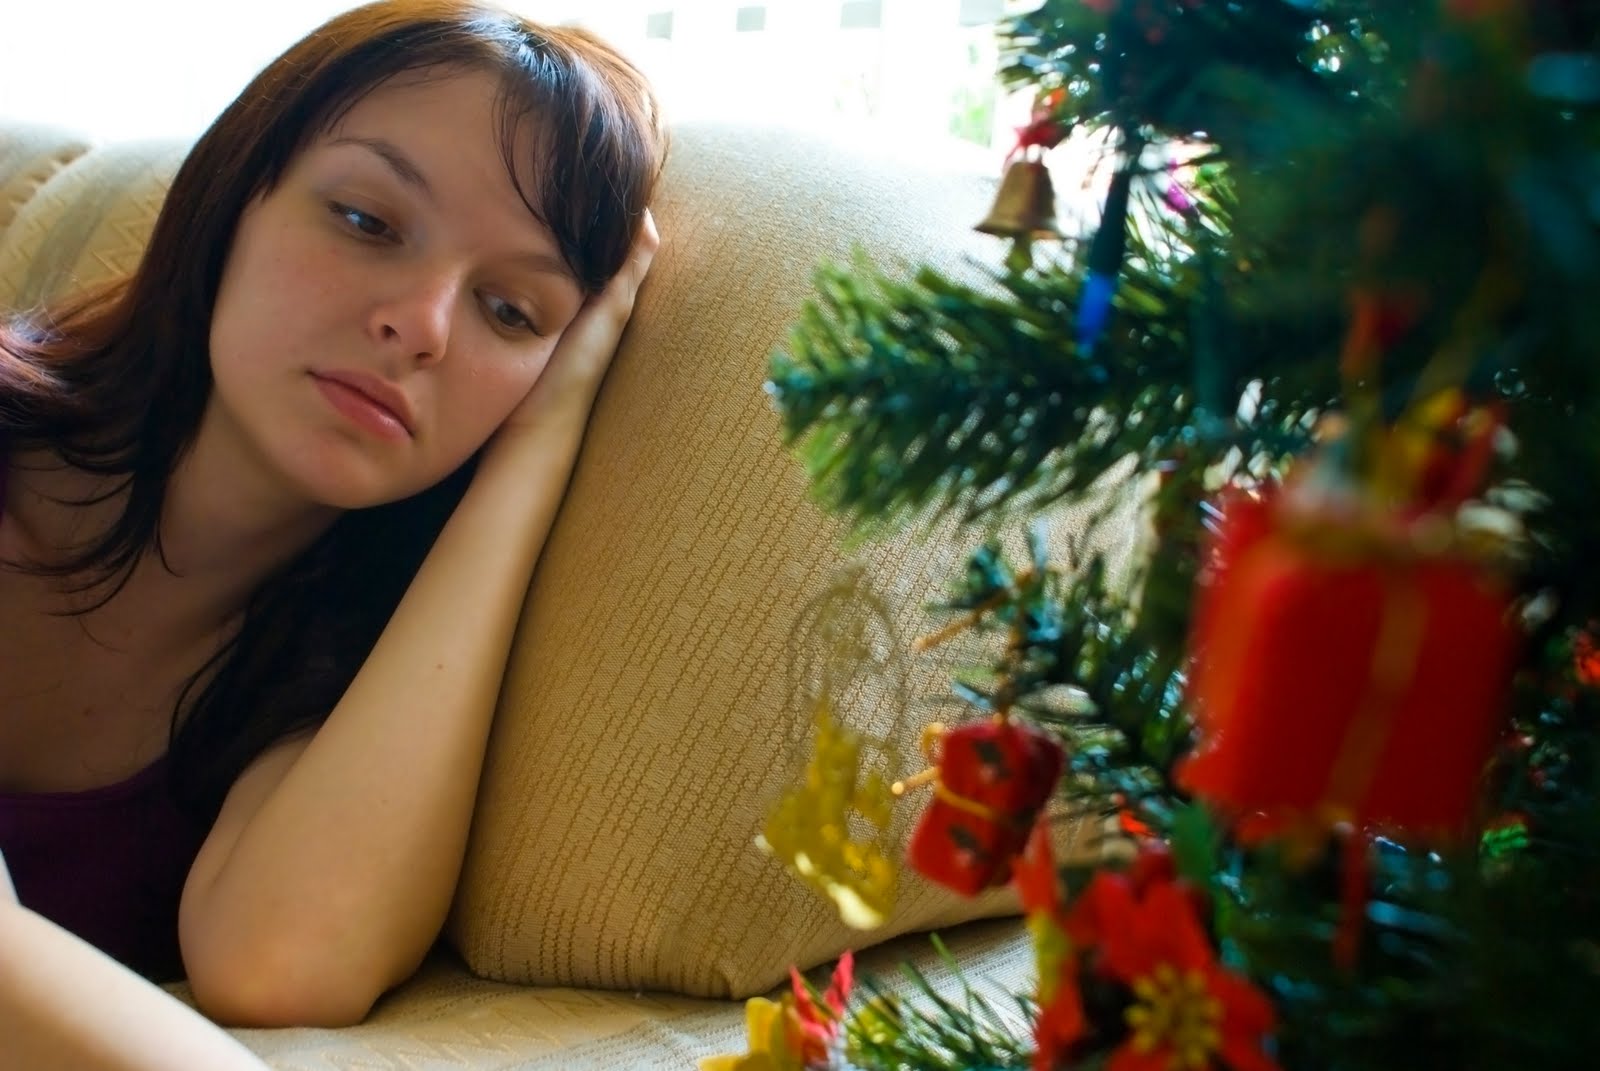 4 Tips To Help Deal With The Holiday Blues